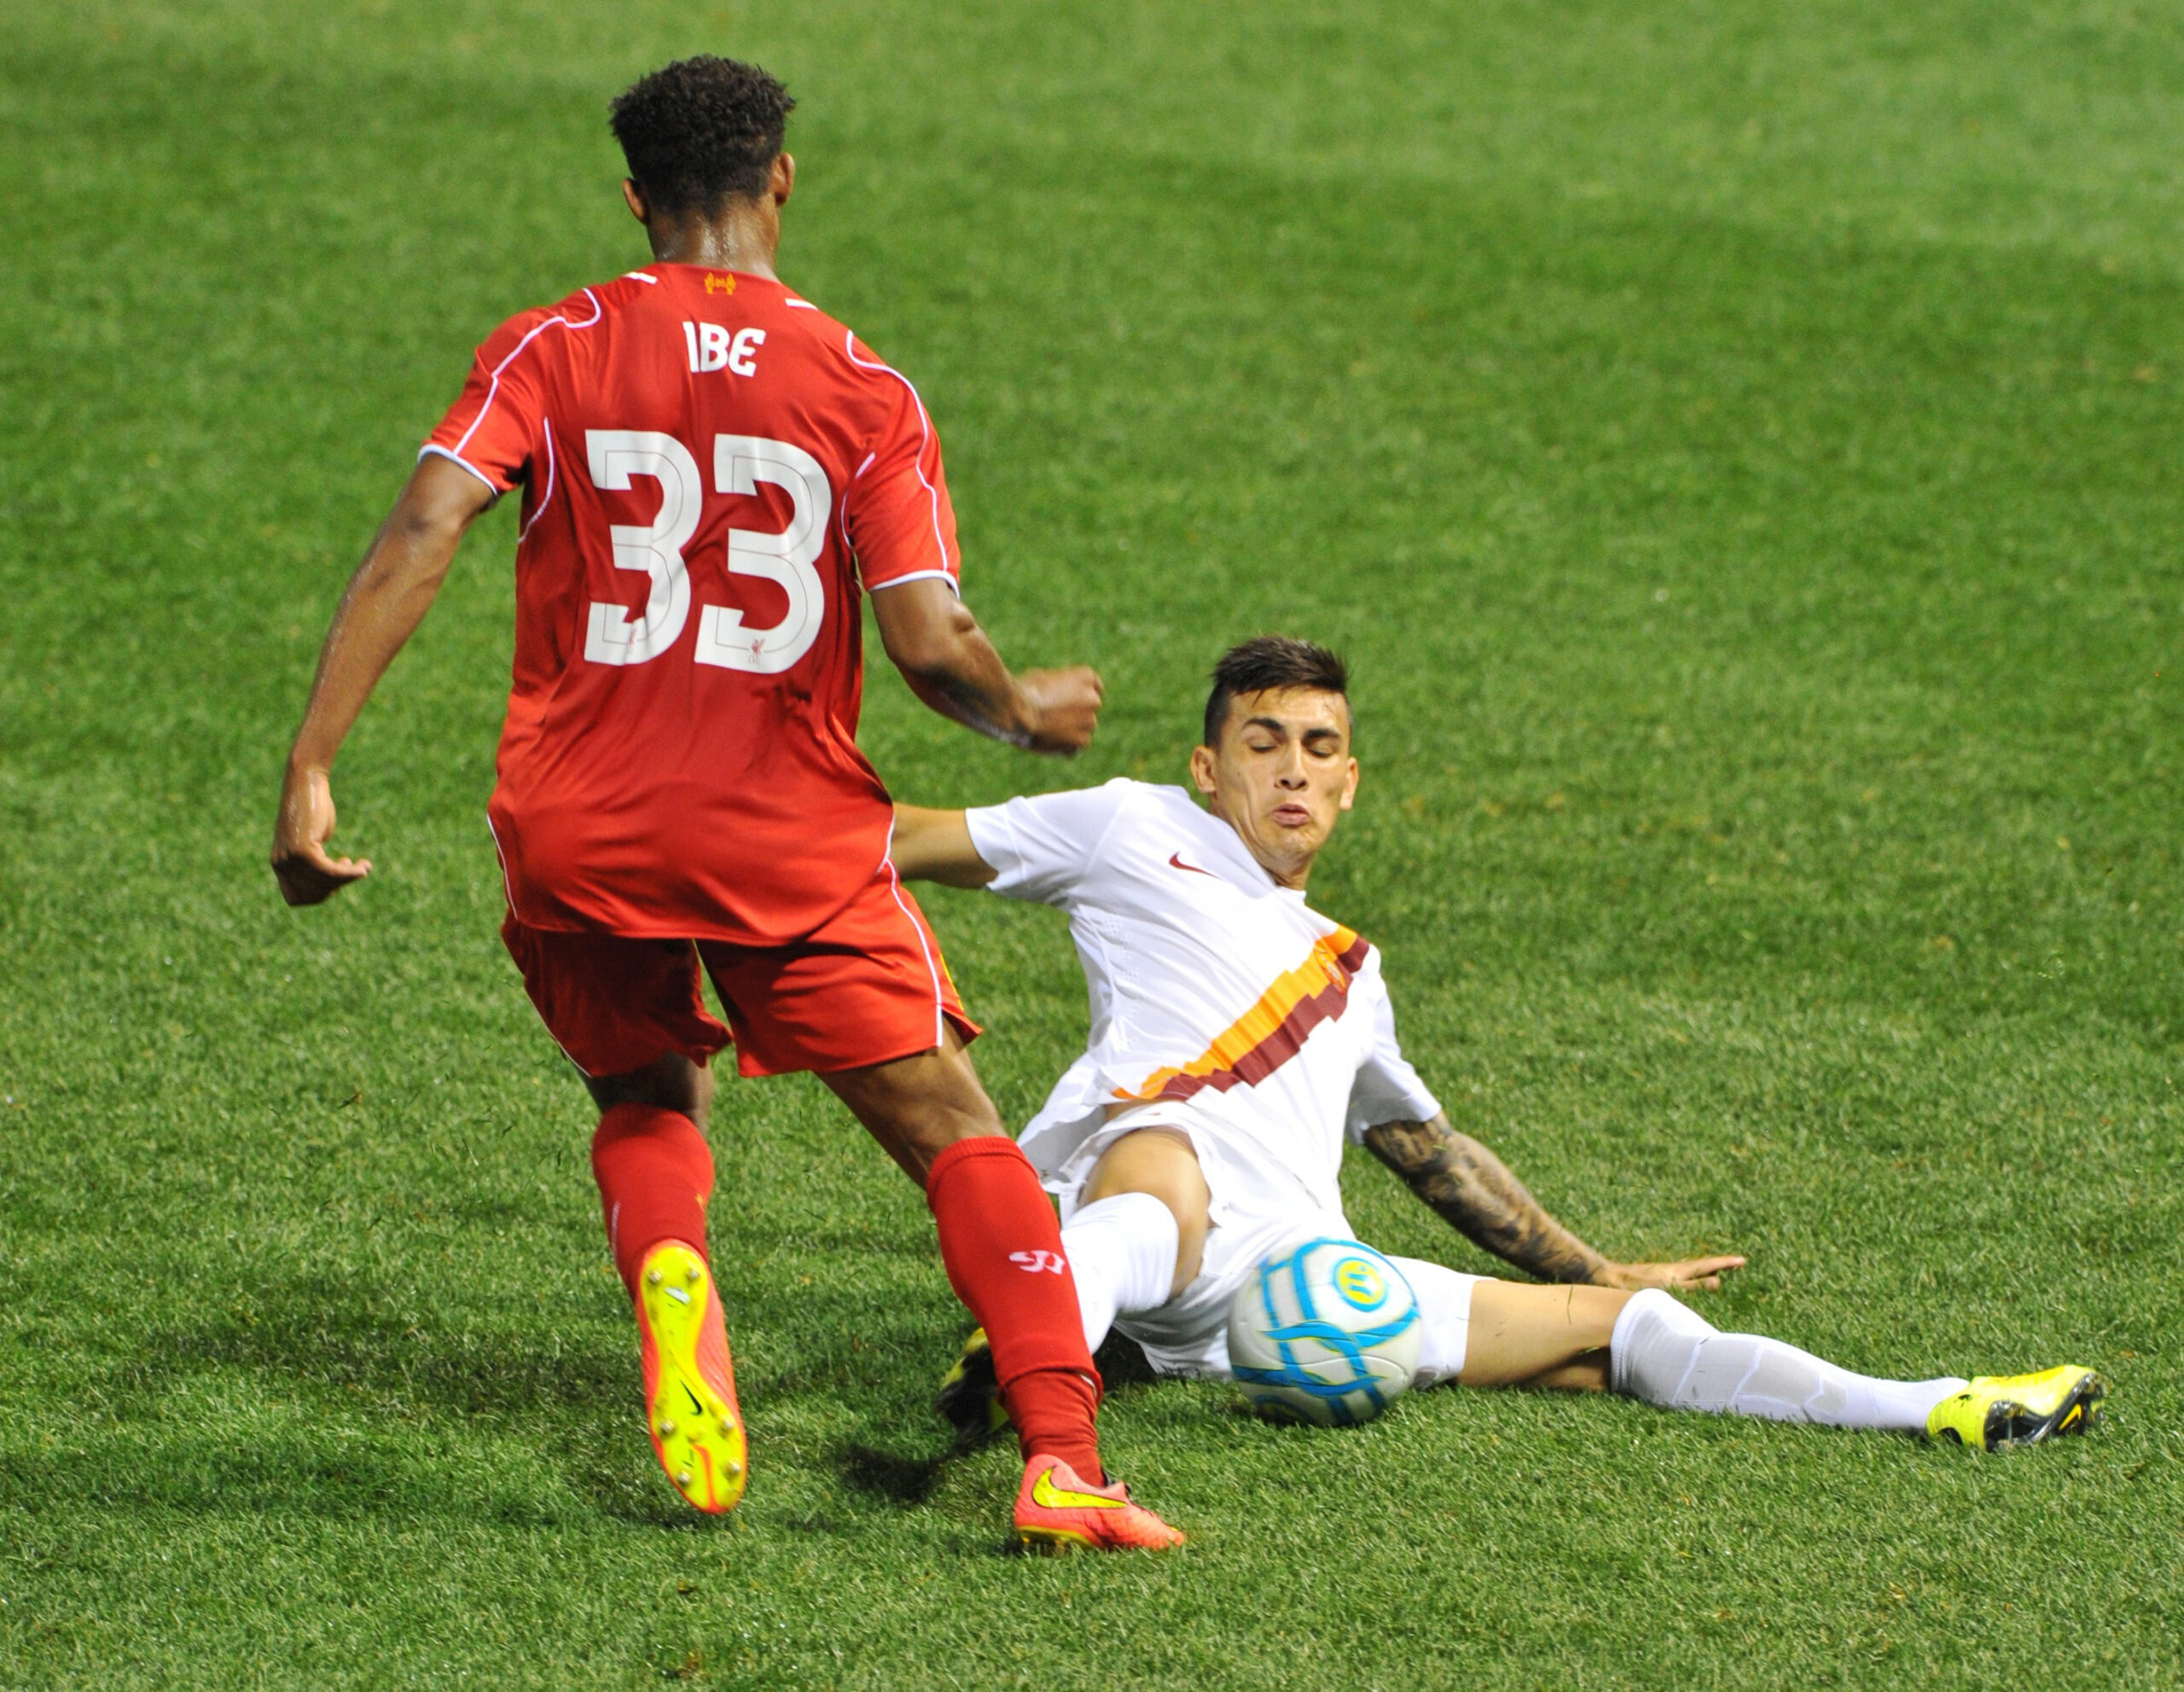 23 July 2014:Roma defender Tin Jedvaj #33 slides in and knocks the ball away from Liverpool forward Jordon Ibe #33 during the Roma game against Liverpool at Fenway Park in Boston, MA.  (Icon Sportswire via AP Images)